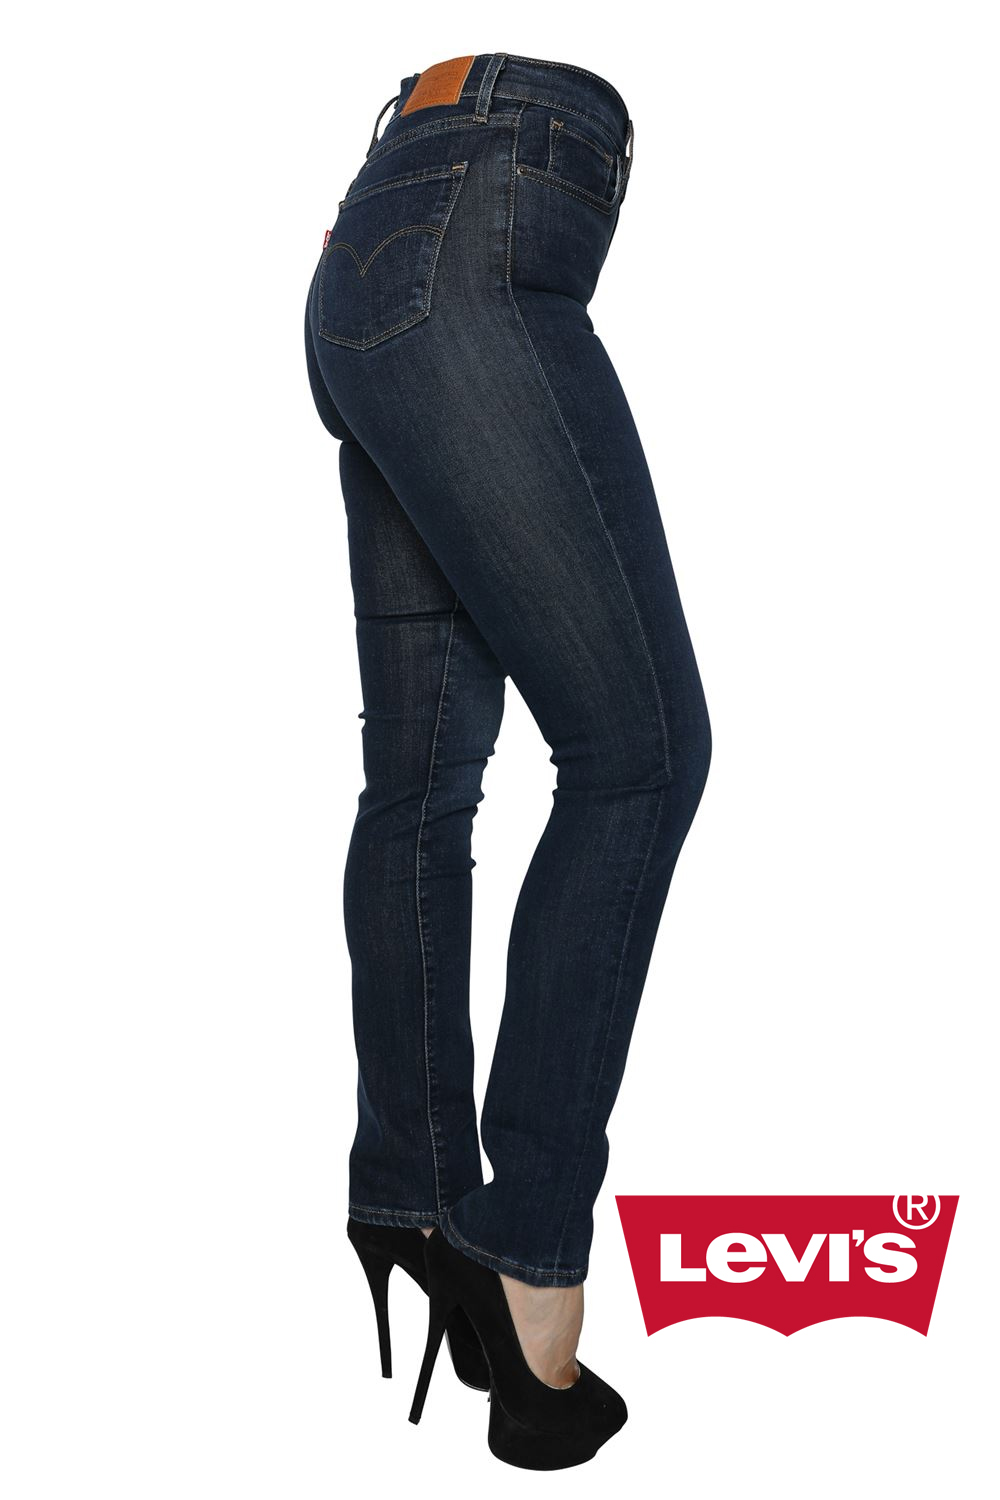 724 High Rise Straight Levis jeans